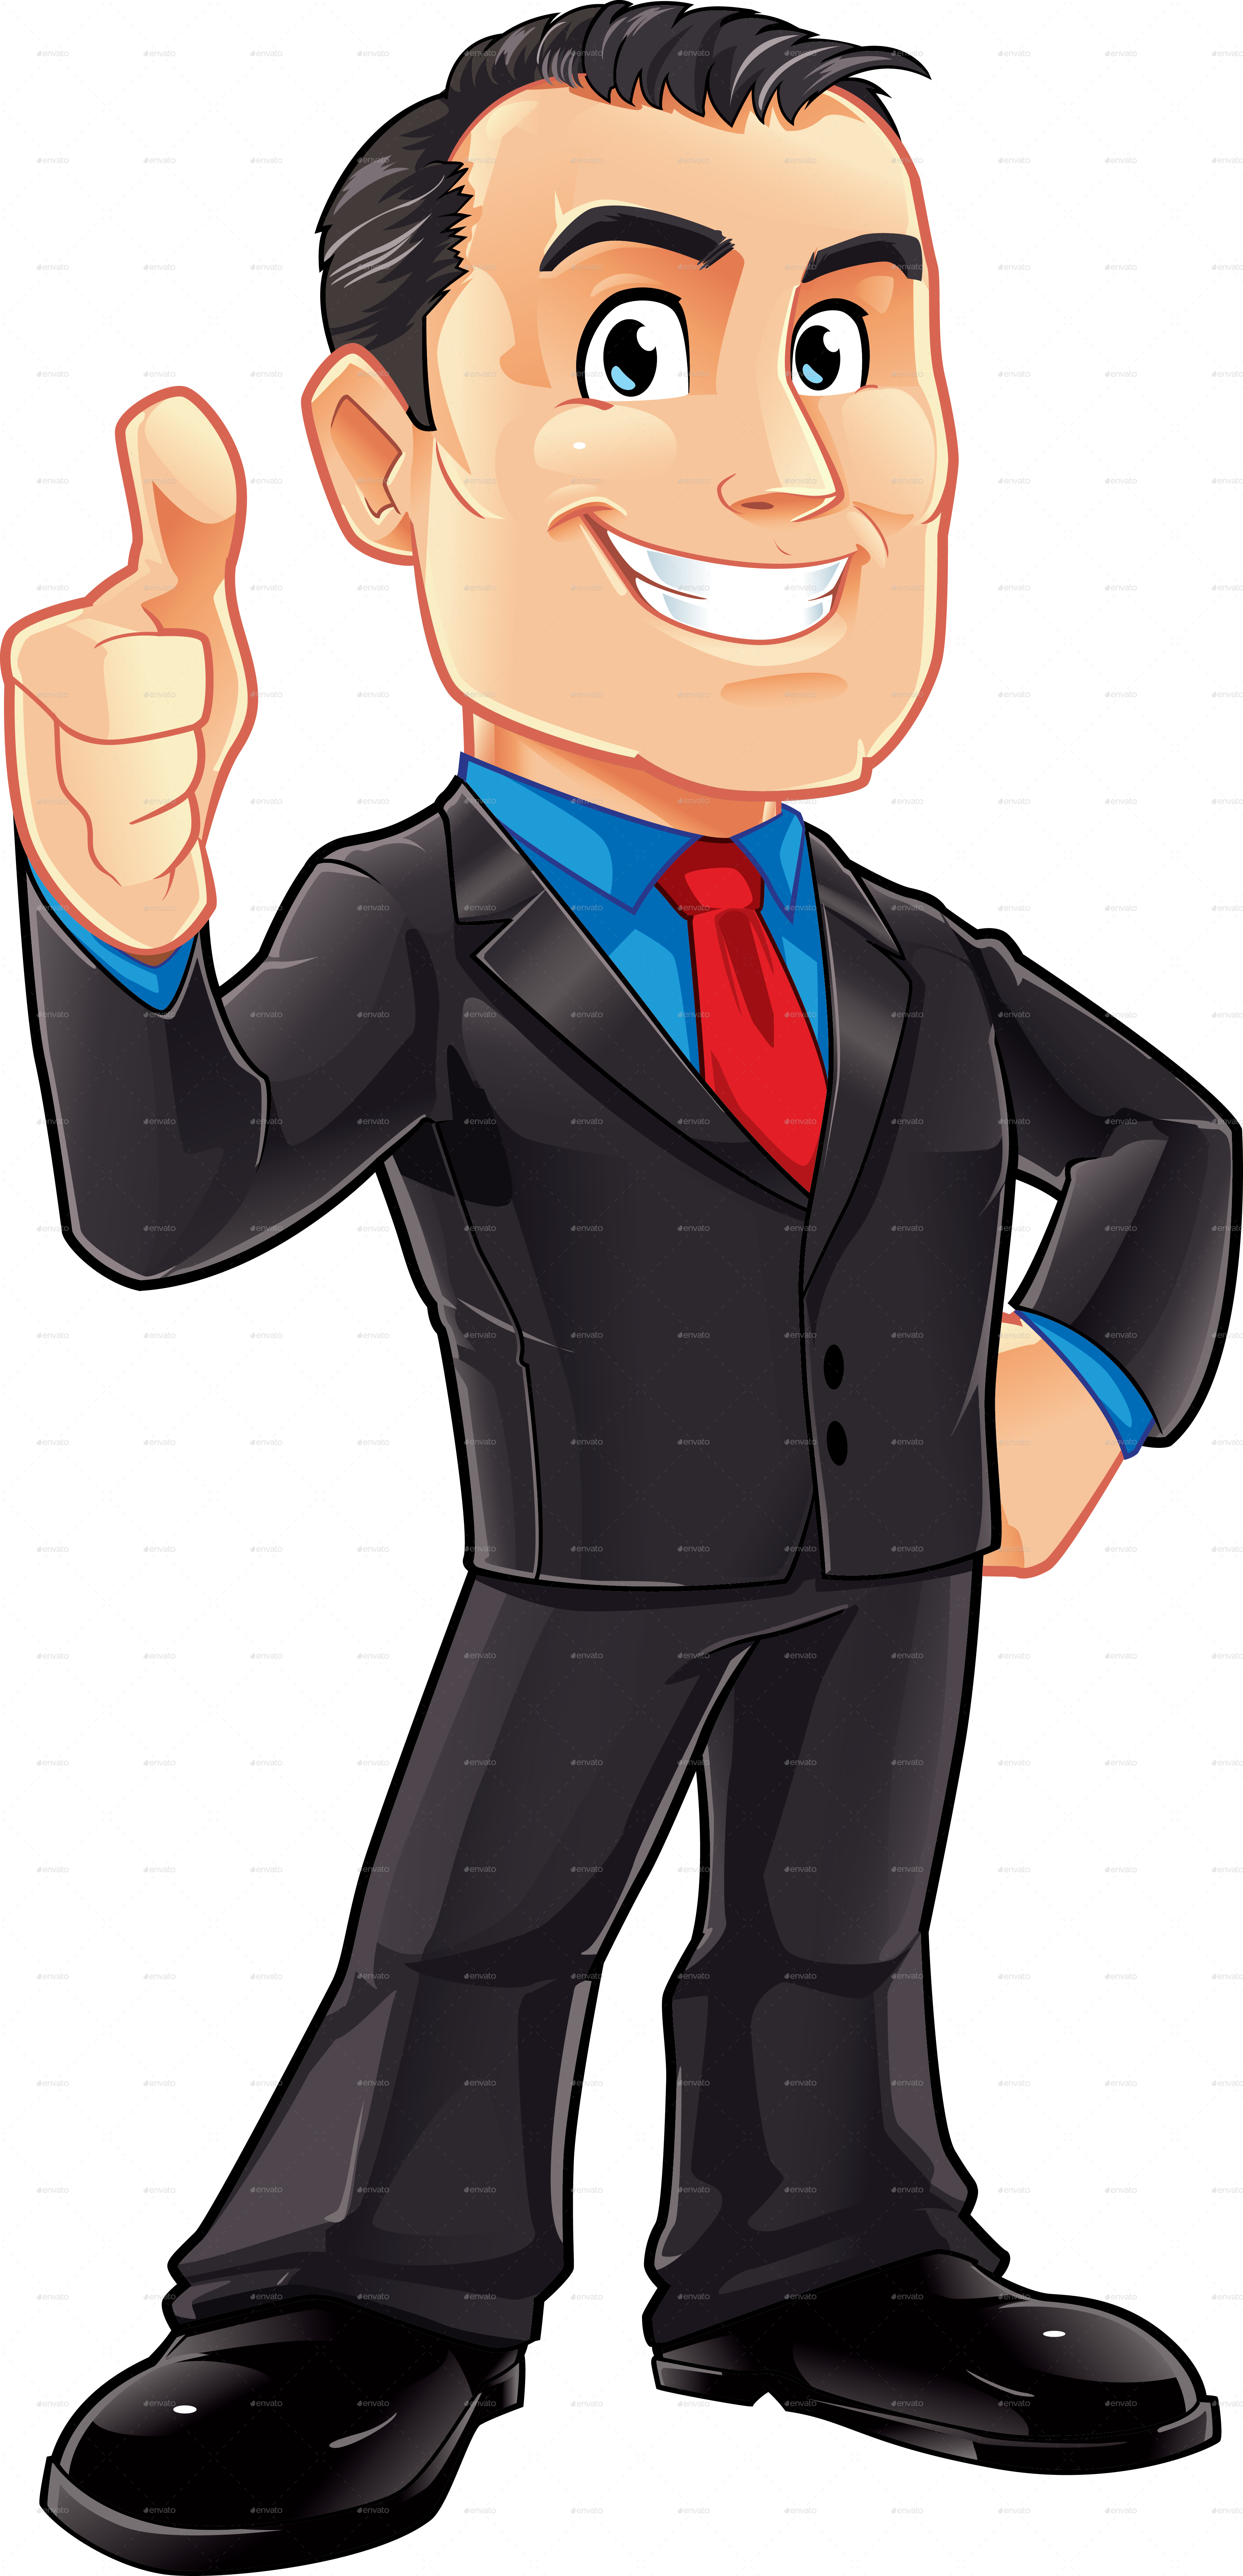 Business Man Mascot by dee_artist | GraphicRiver